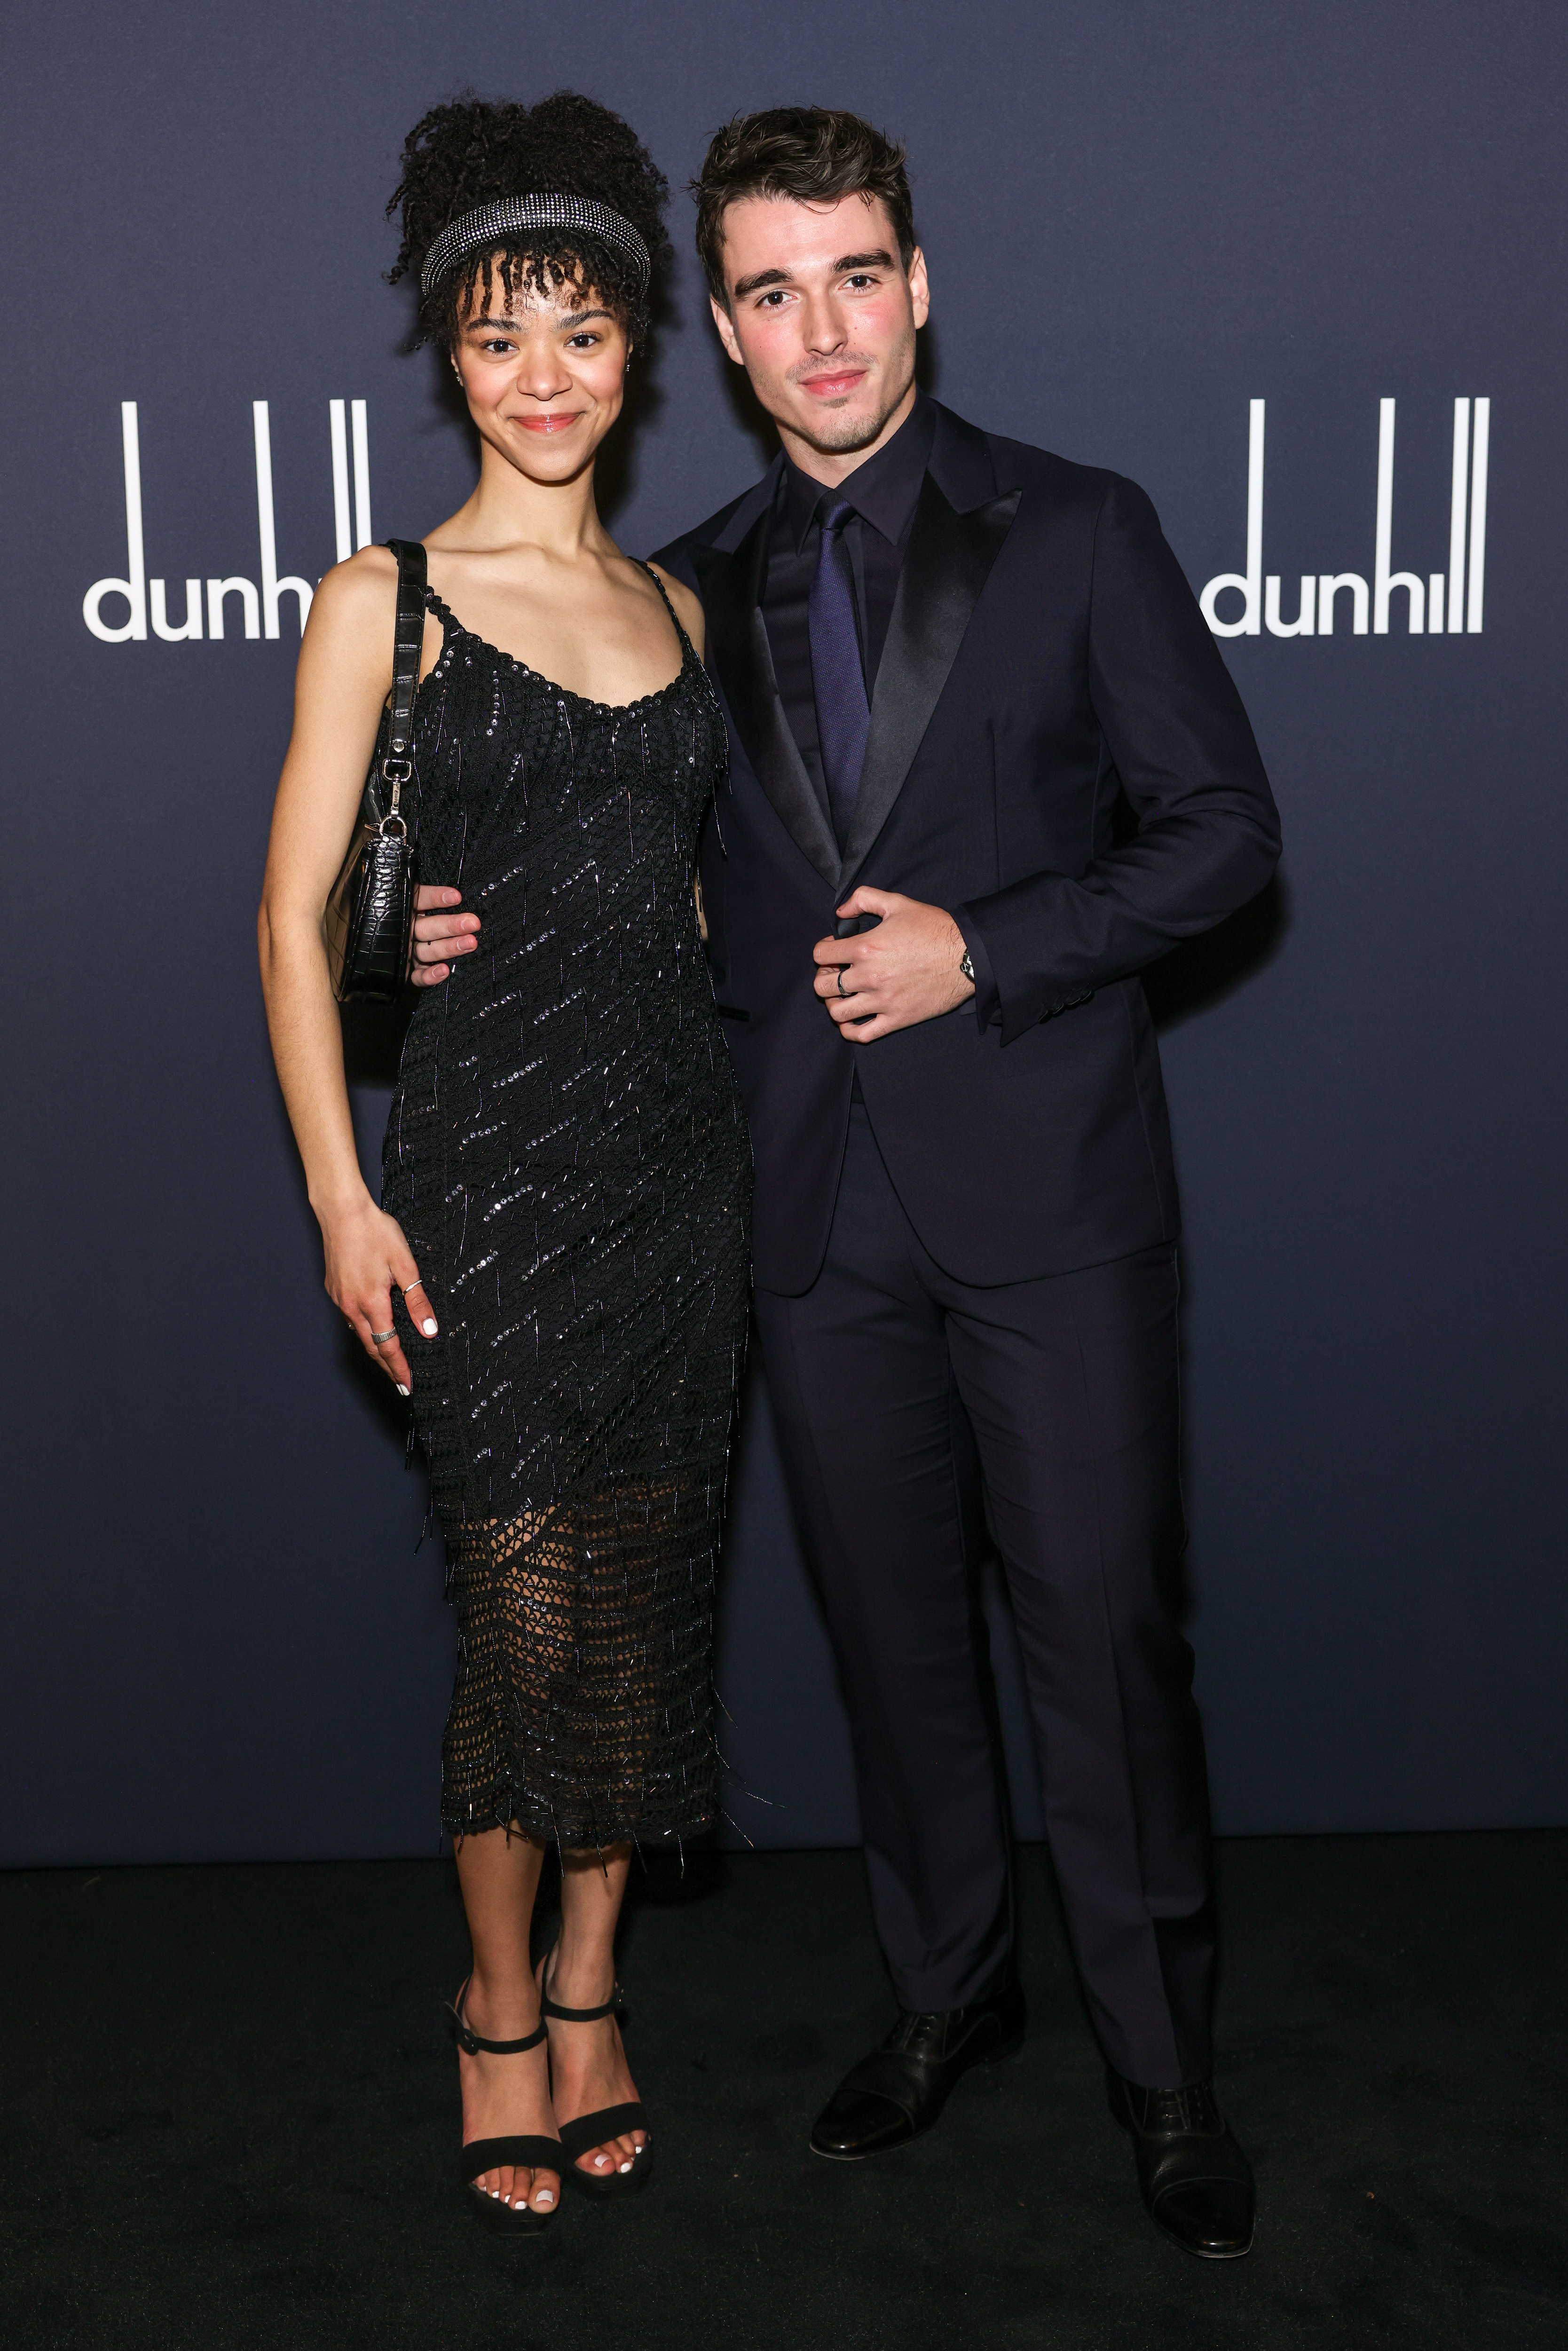 India Ria Amarteifio and Corey Mylchreest at the Dunhill & BSBP pre-BAFTA filmmakers dinner & party on February 15, 2023, in London | Source: Getty Images